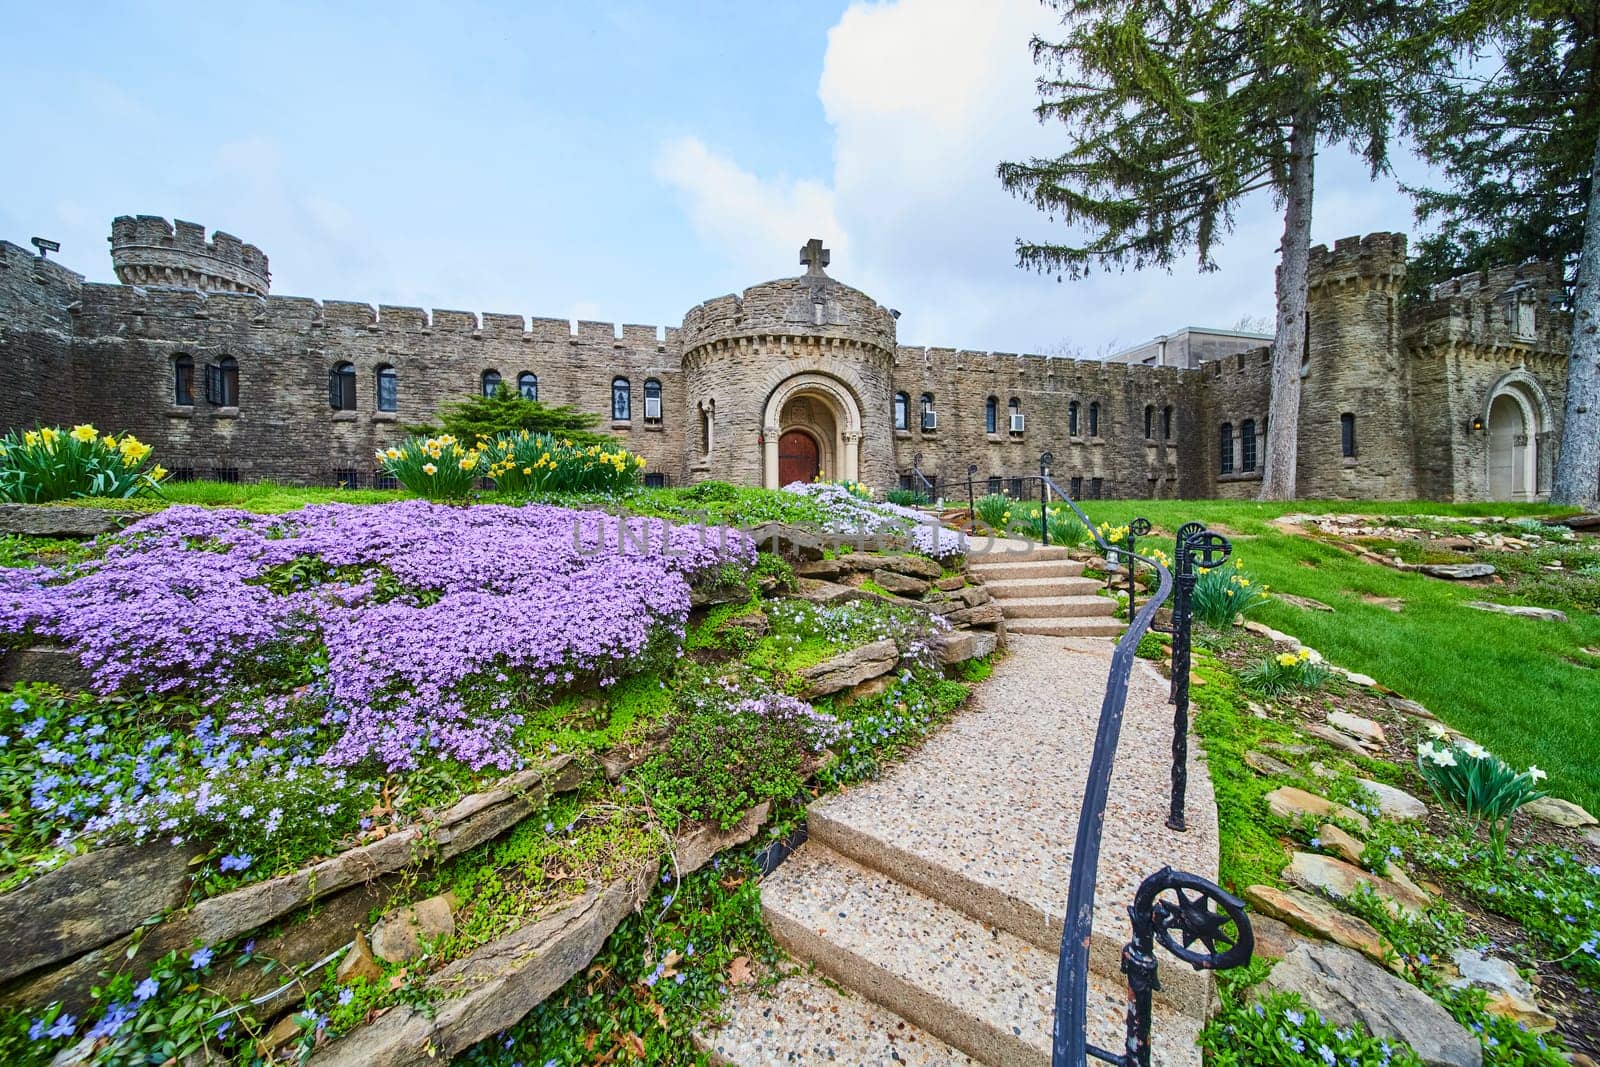 Medieval-inspired Bishop Simon Brute College, set in vibrant spring bloom, exuding Indiana heritage and religious tranquillity.